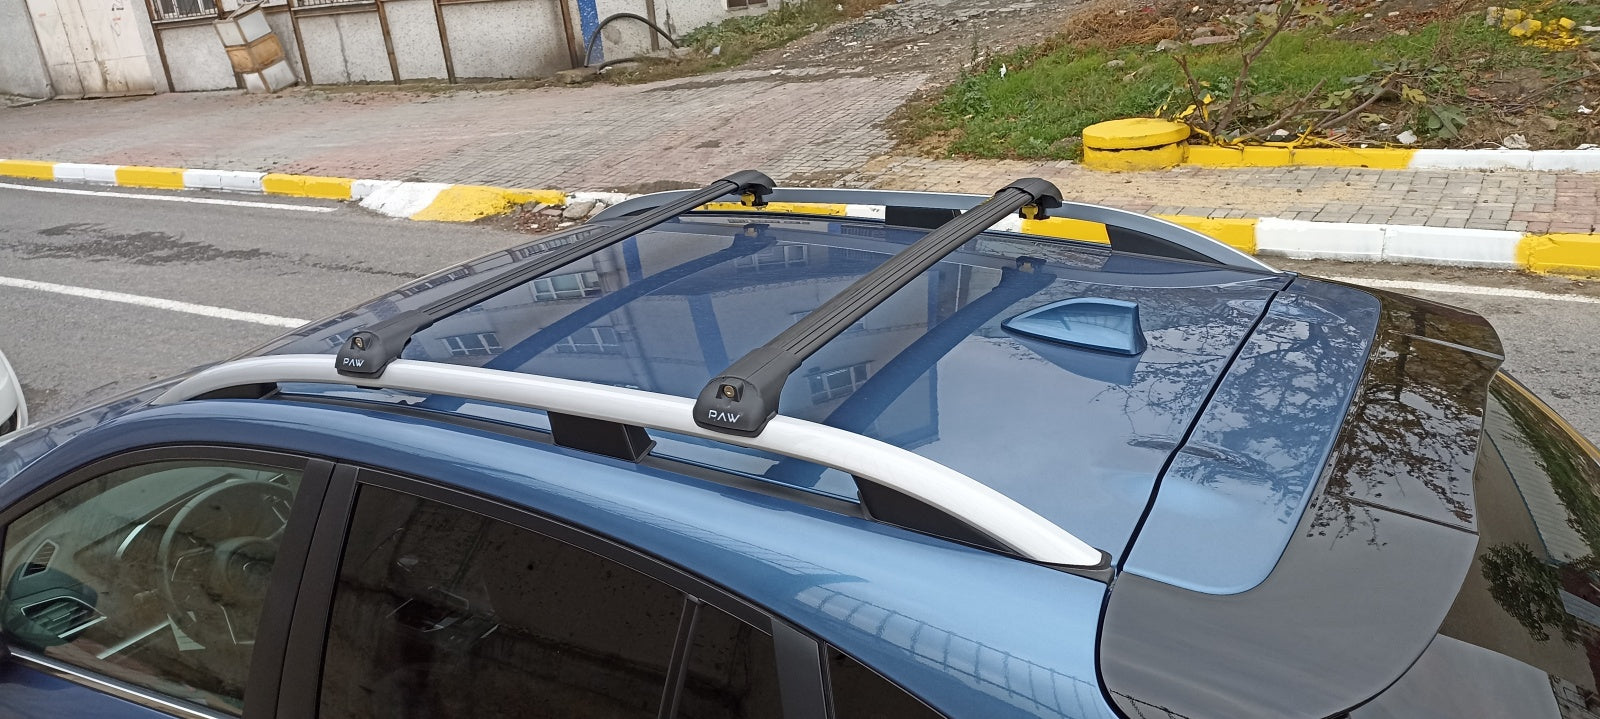 For Opel&Vauxhall Frontera Sport 1999-2004 Roof Rack System Carrier Cross Bars Aluminum Lockable High Quality of Metal Bracket Black